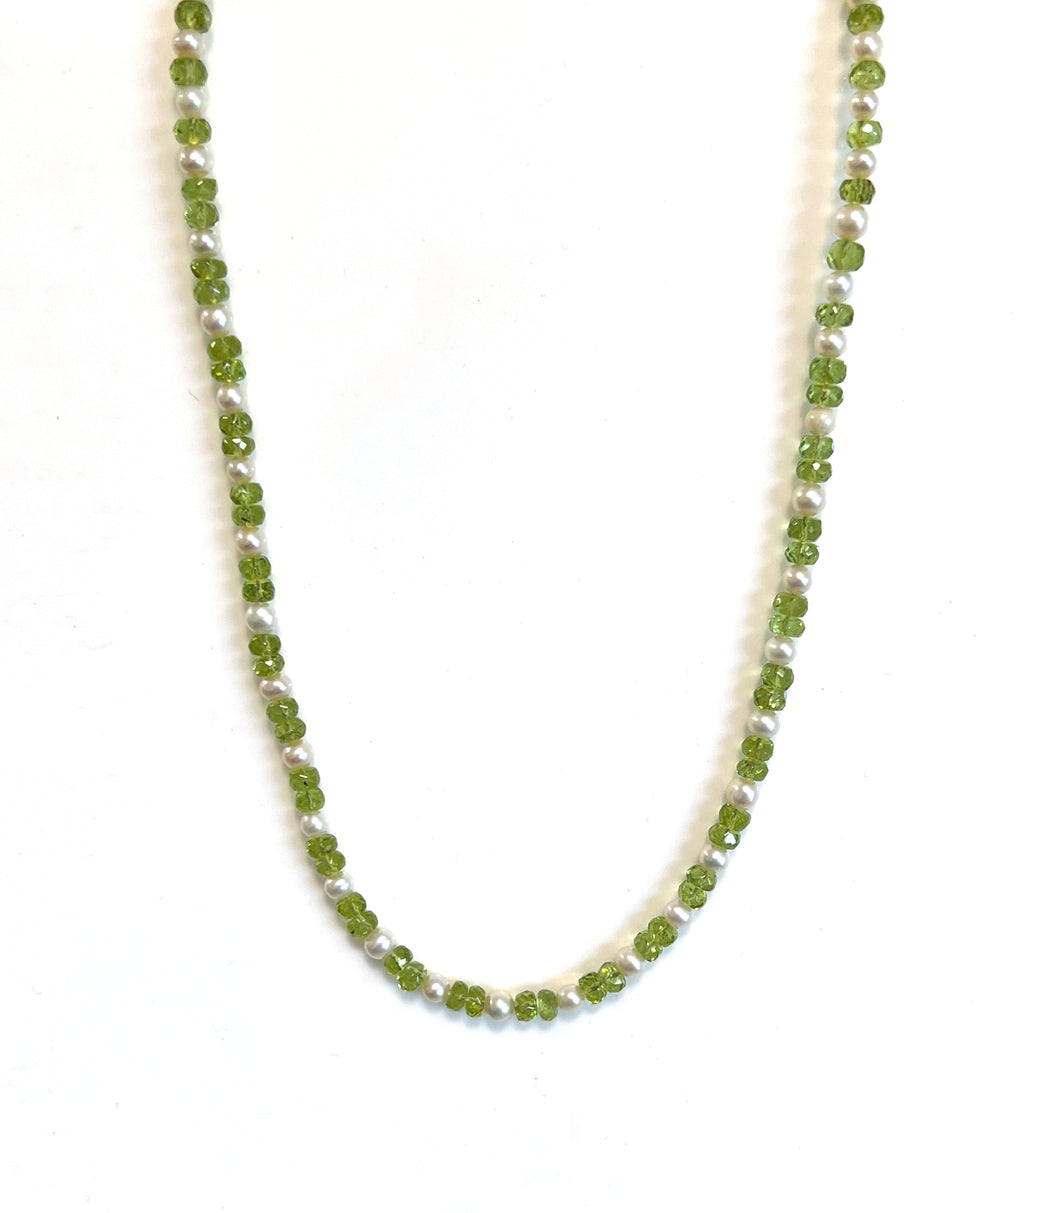 Australian Handmade Green Necklace with Peridot and Pearls